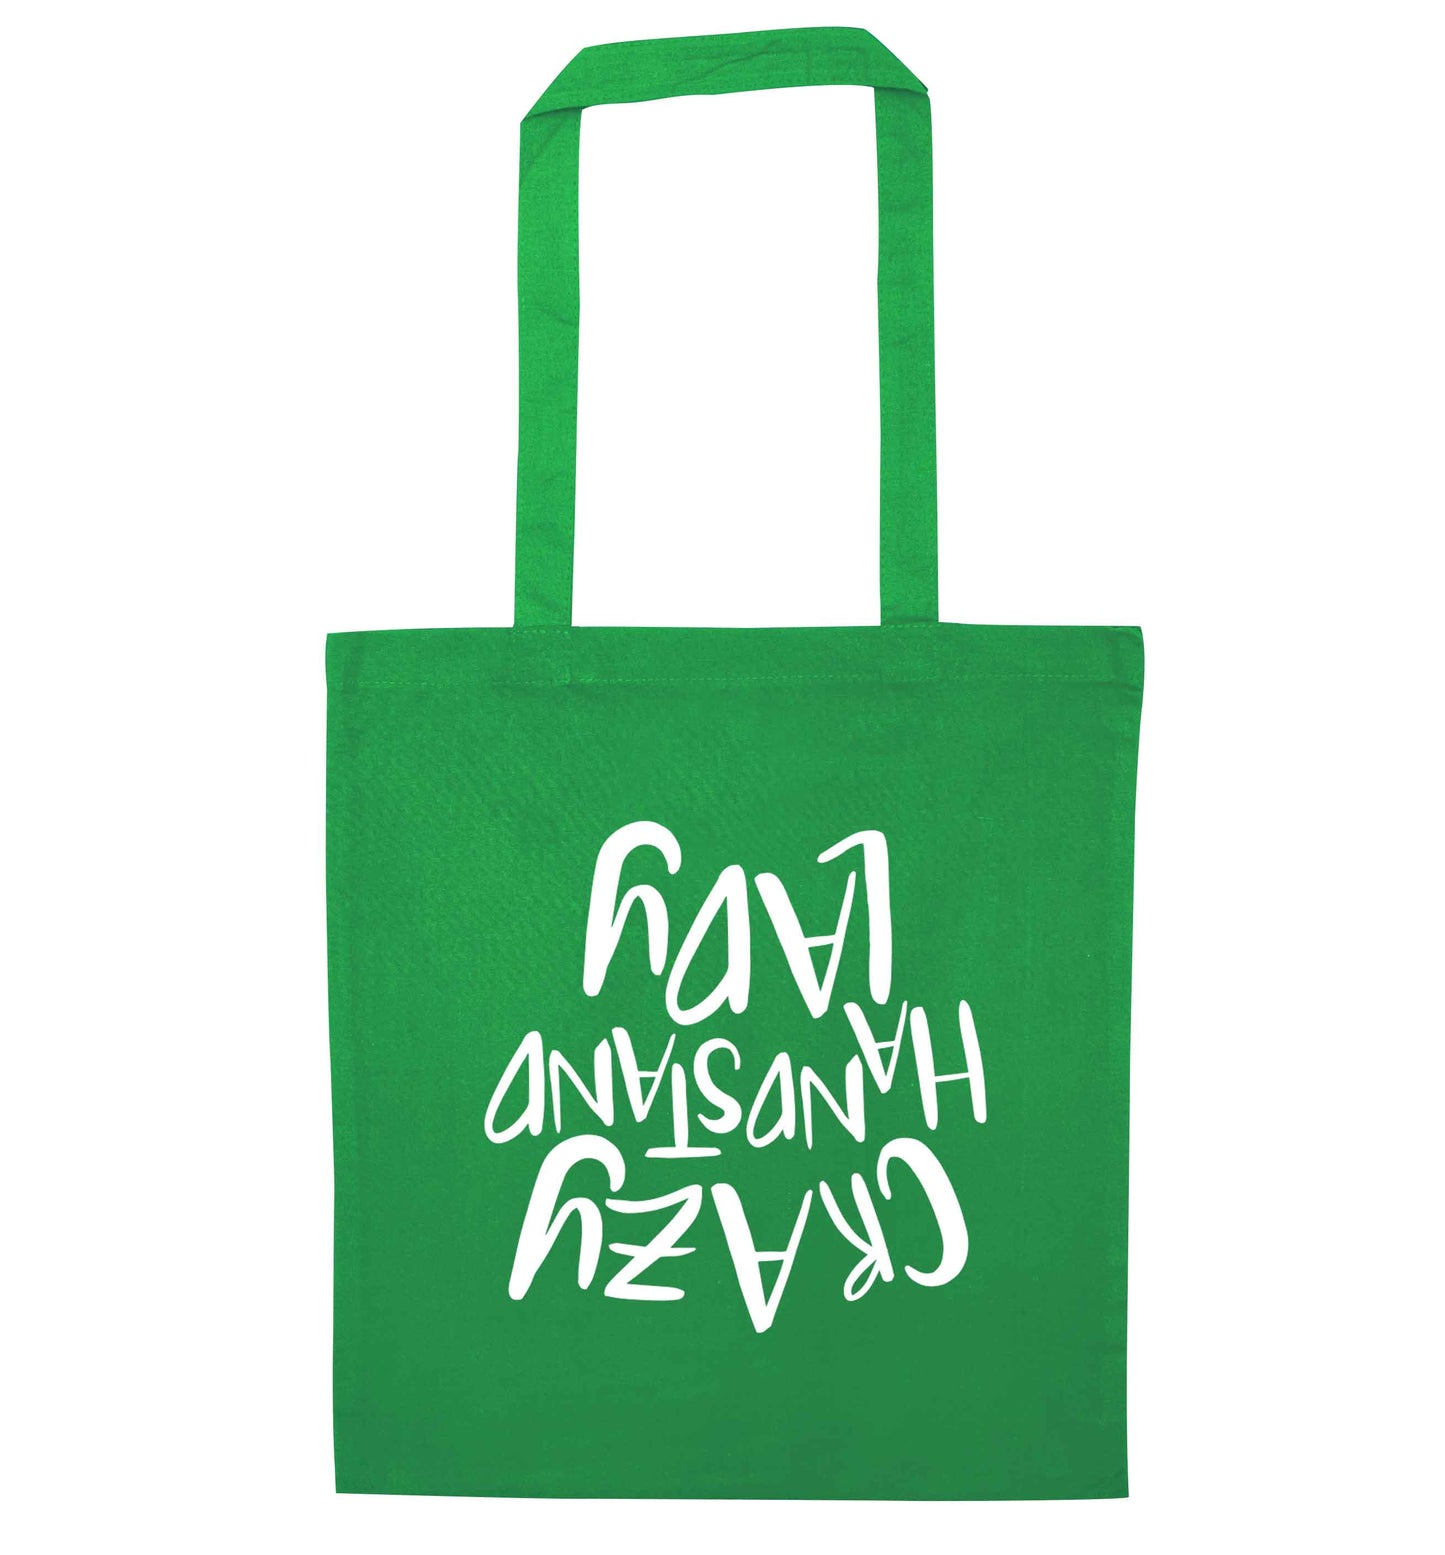 Crazy handstand lady green tote bag